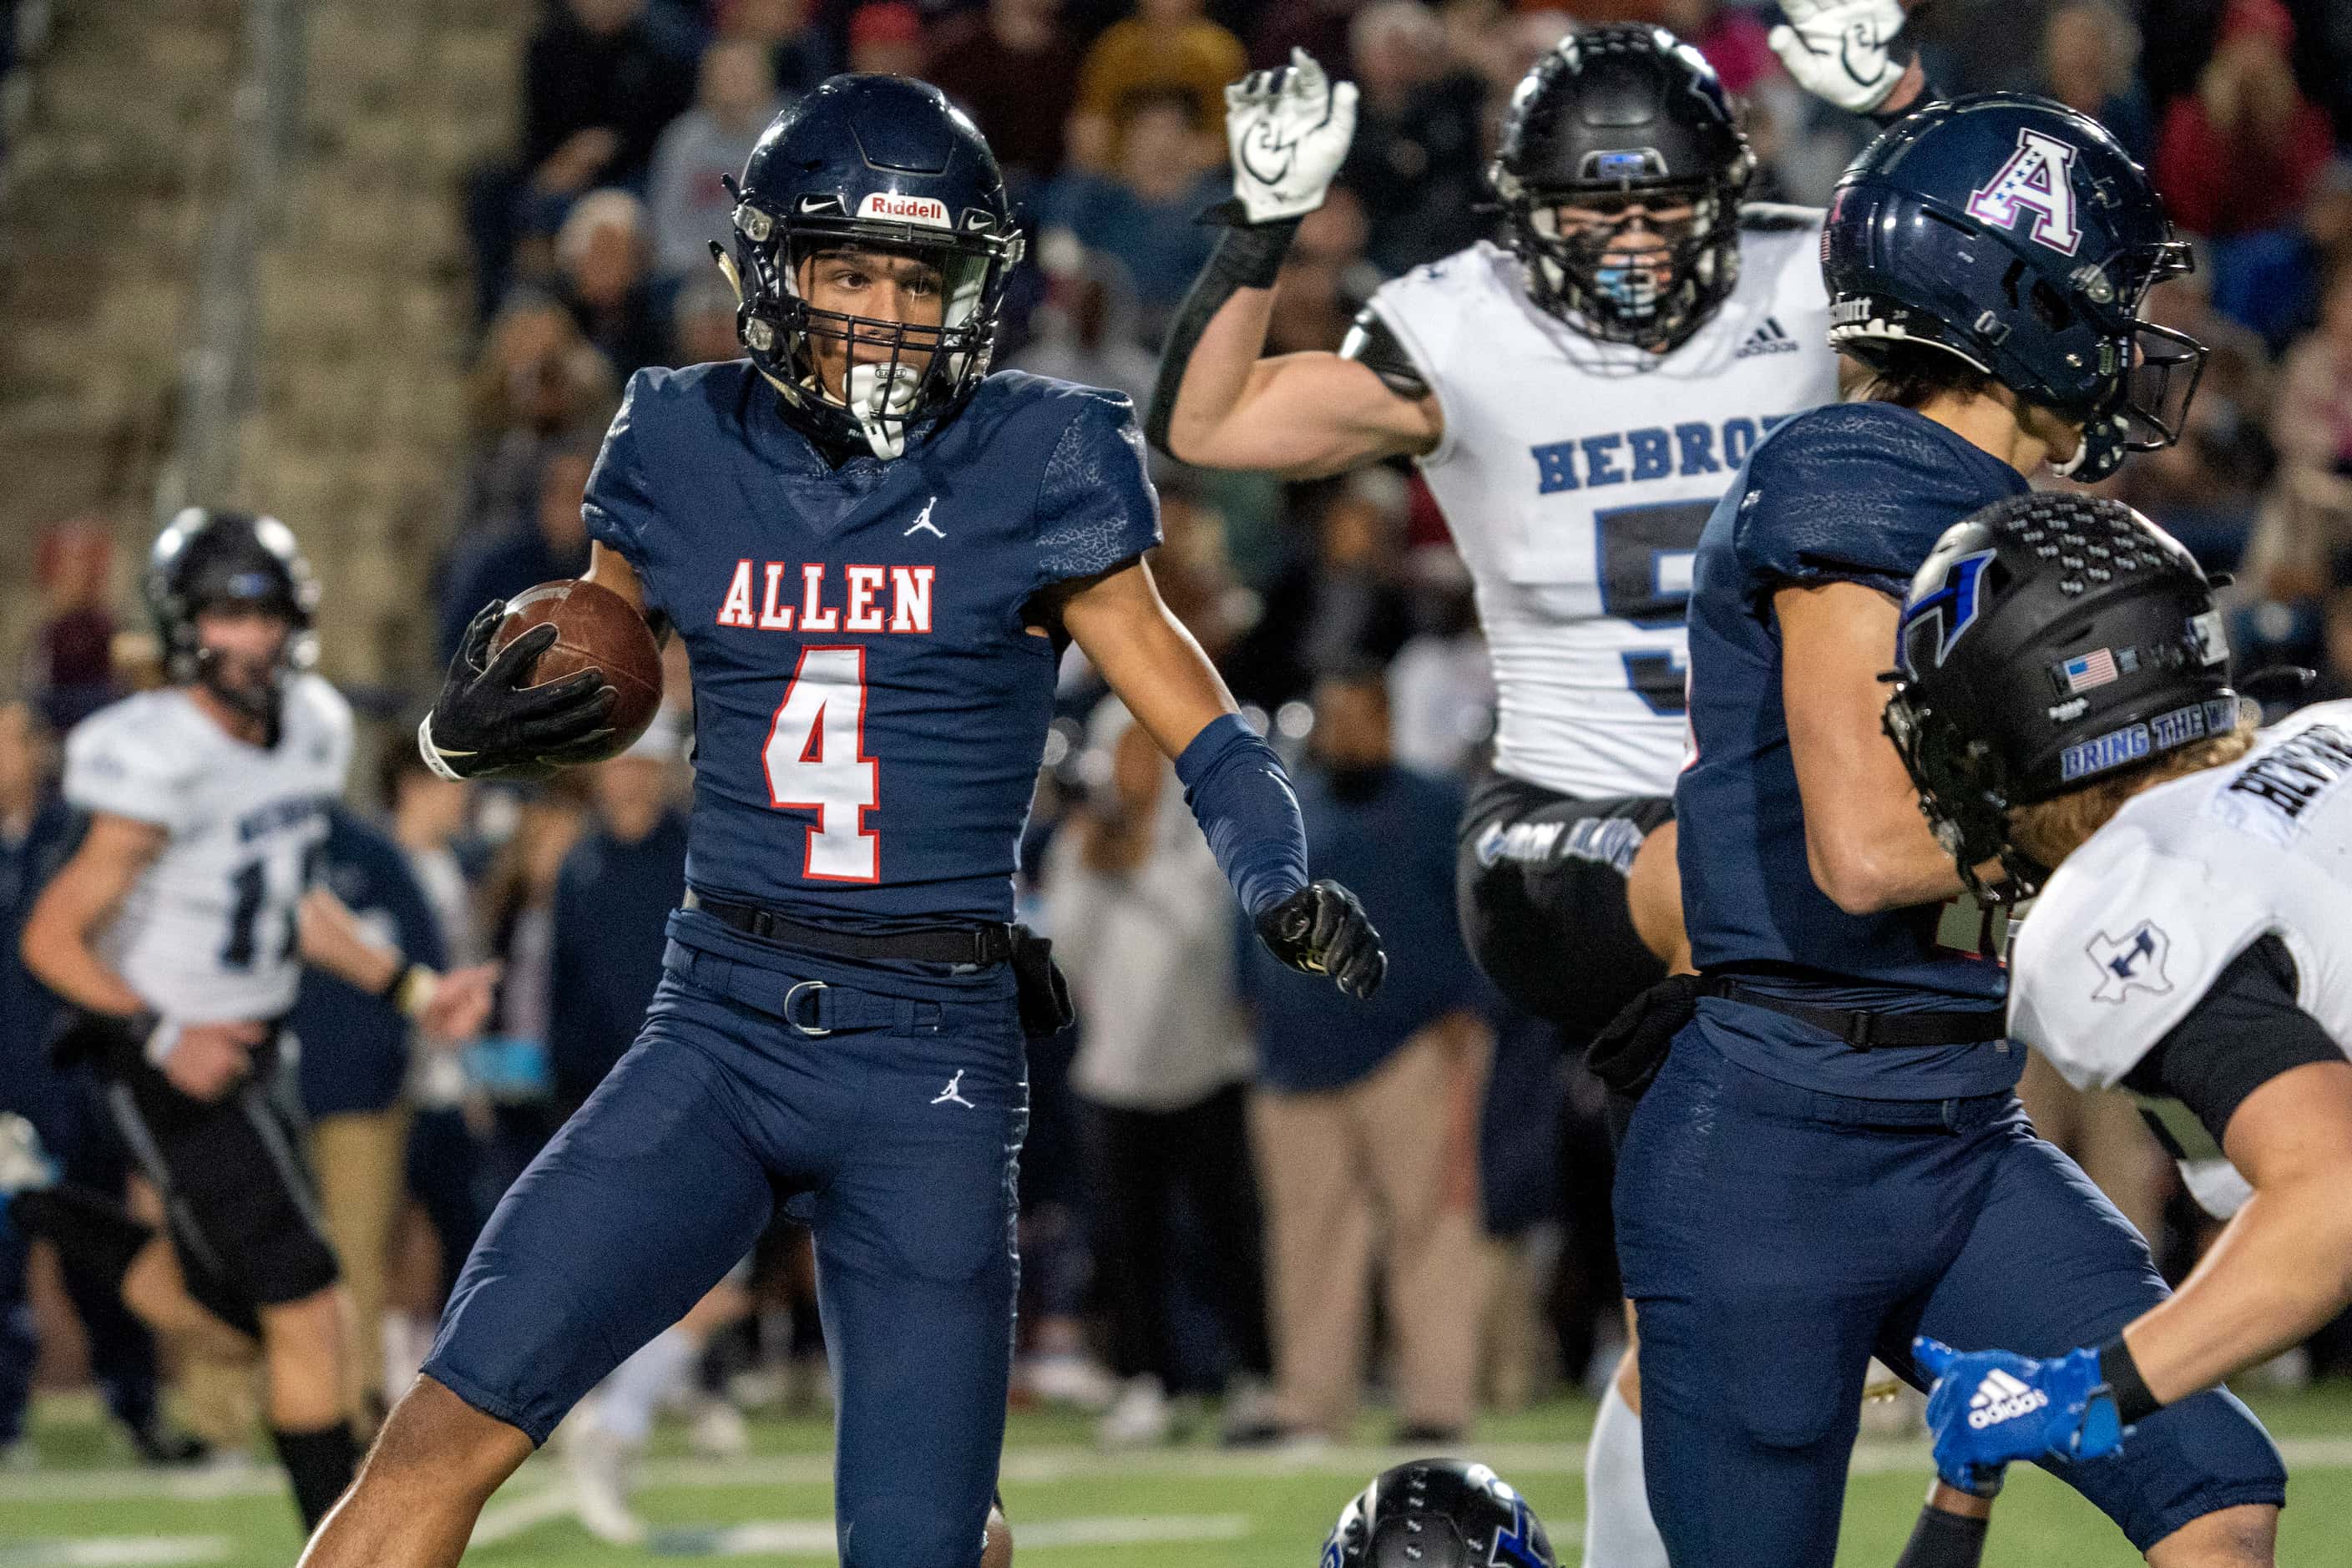 Allen senior wide receiver Jordyn Tyson (4) looks for yards after the catch on a reception...